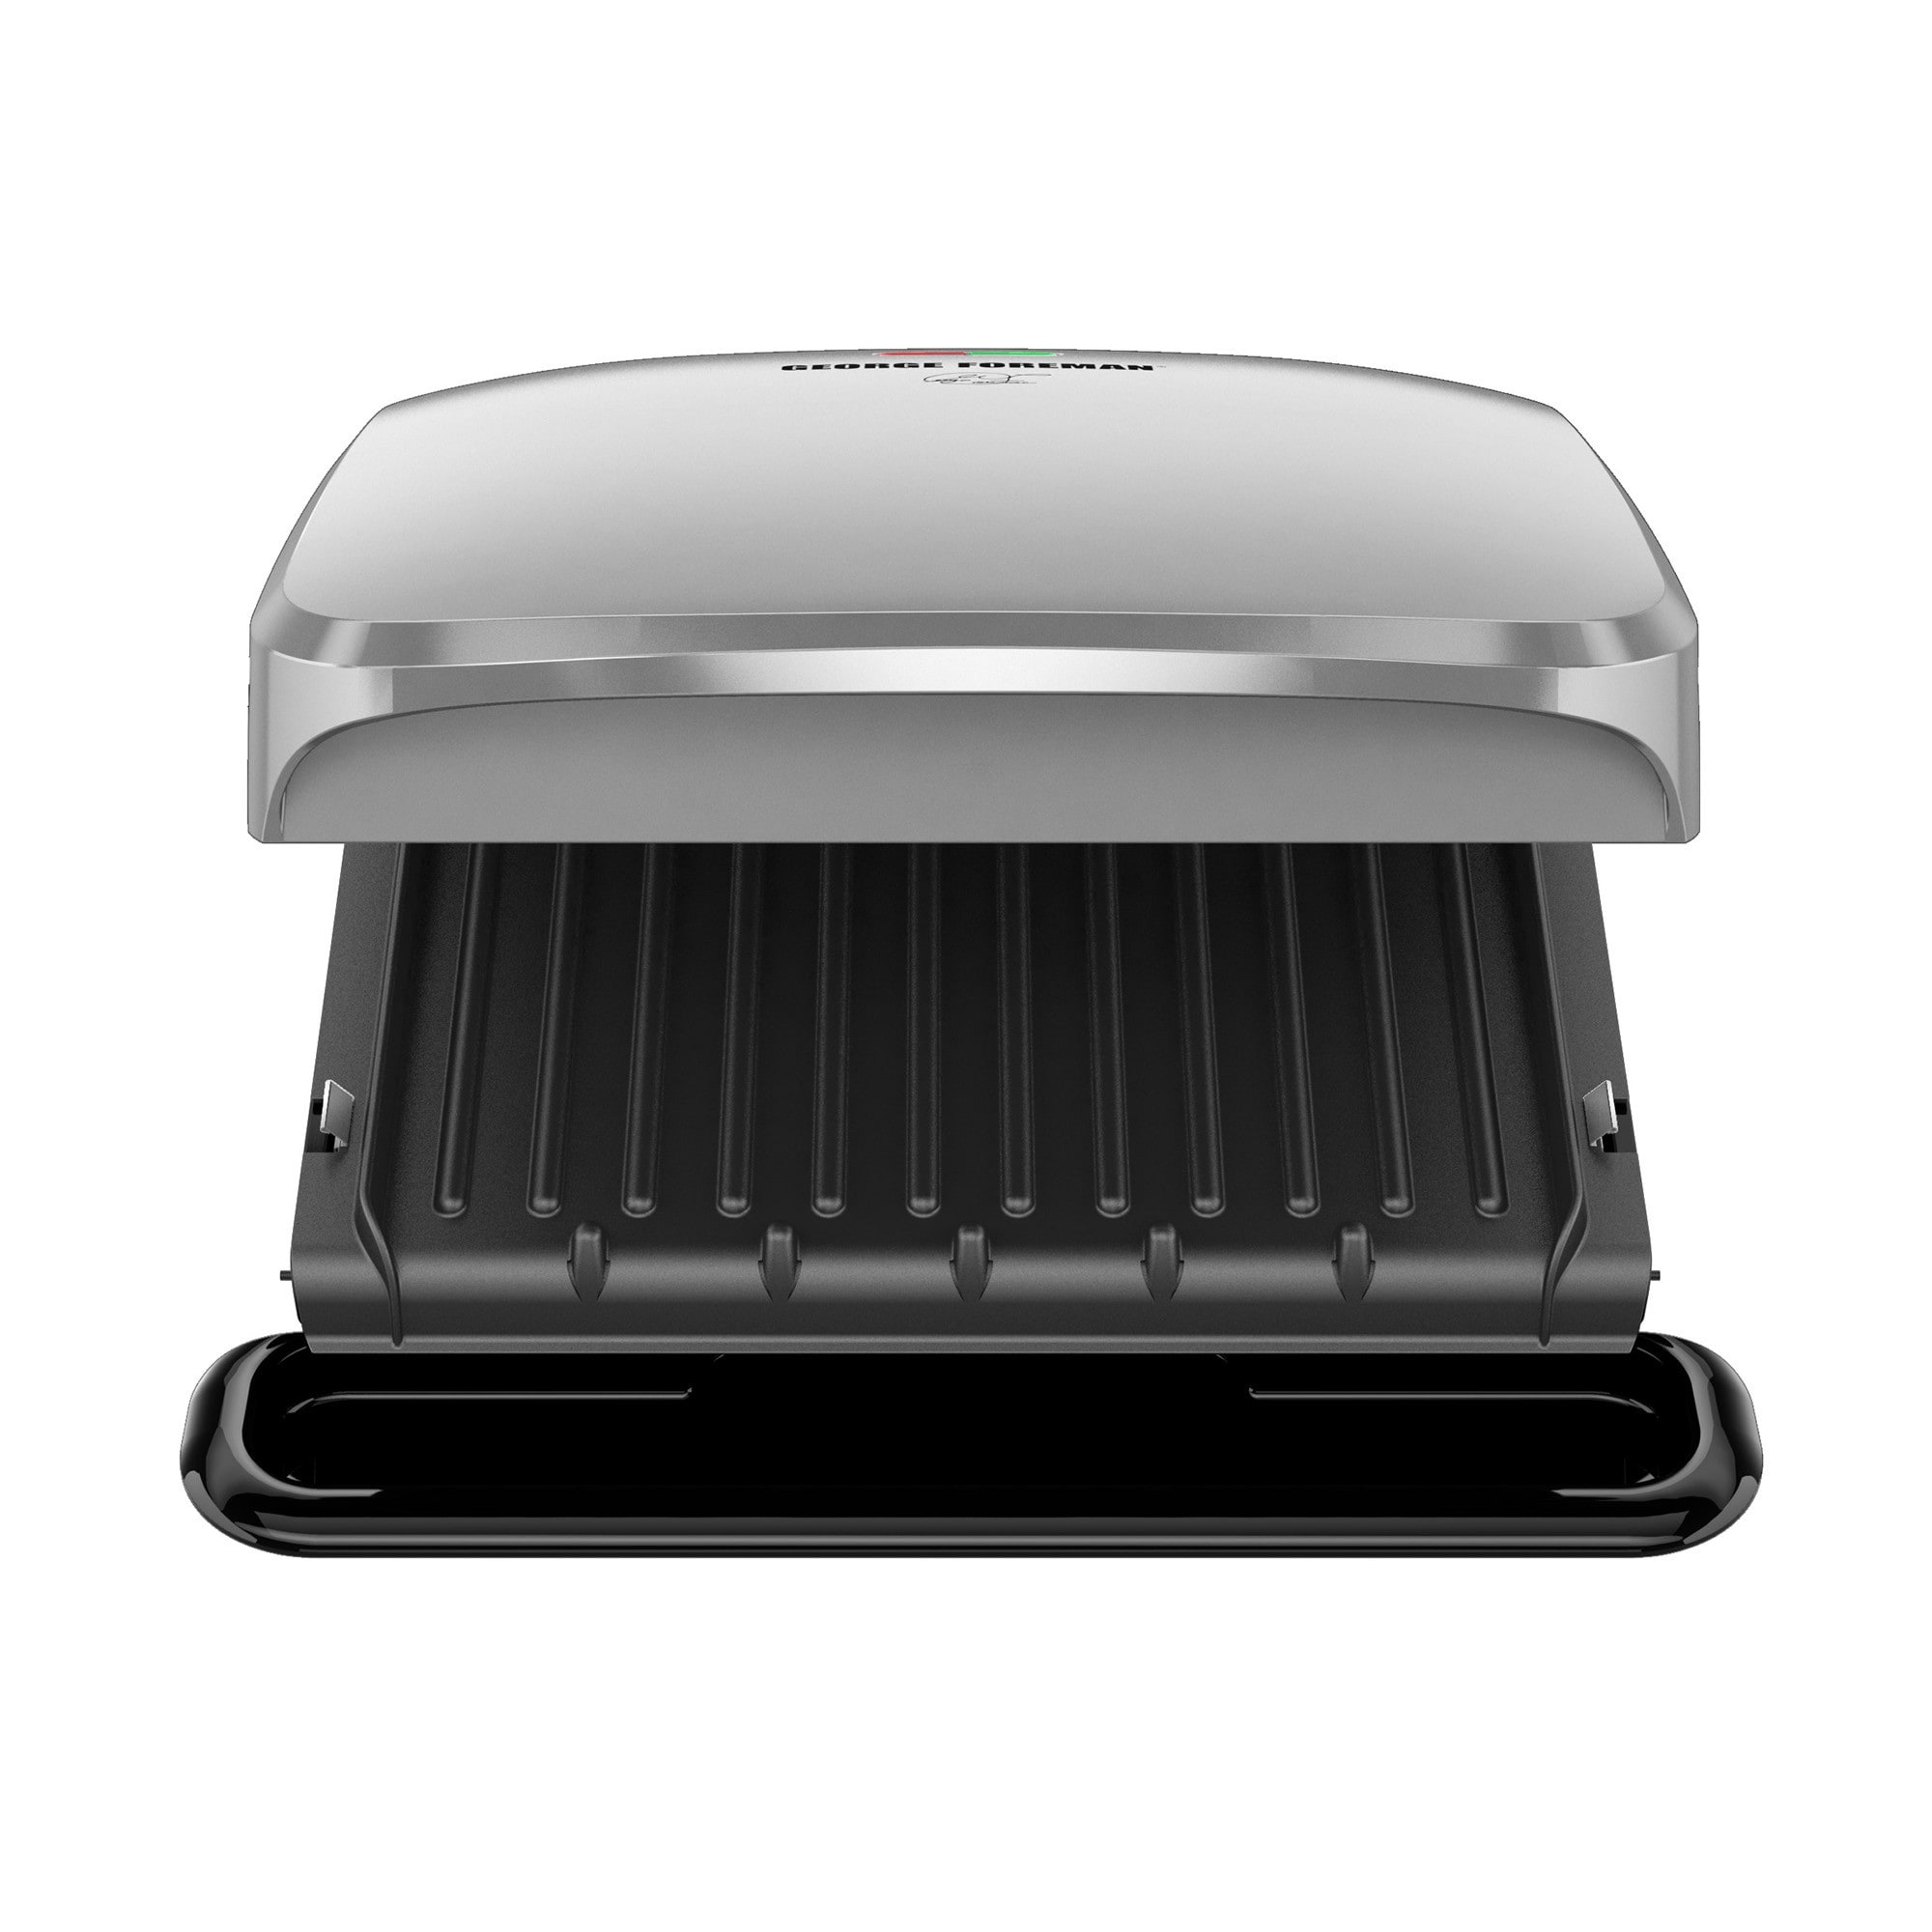 George Foreman 5-Serving Removable Plate Grill and Panini Press GRP472 -  appliances - by owner - sale - craigslist